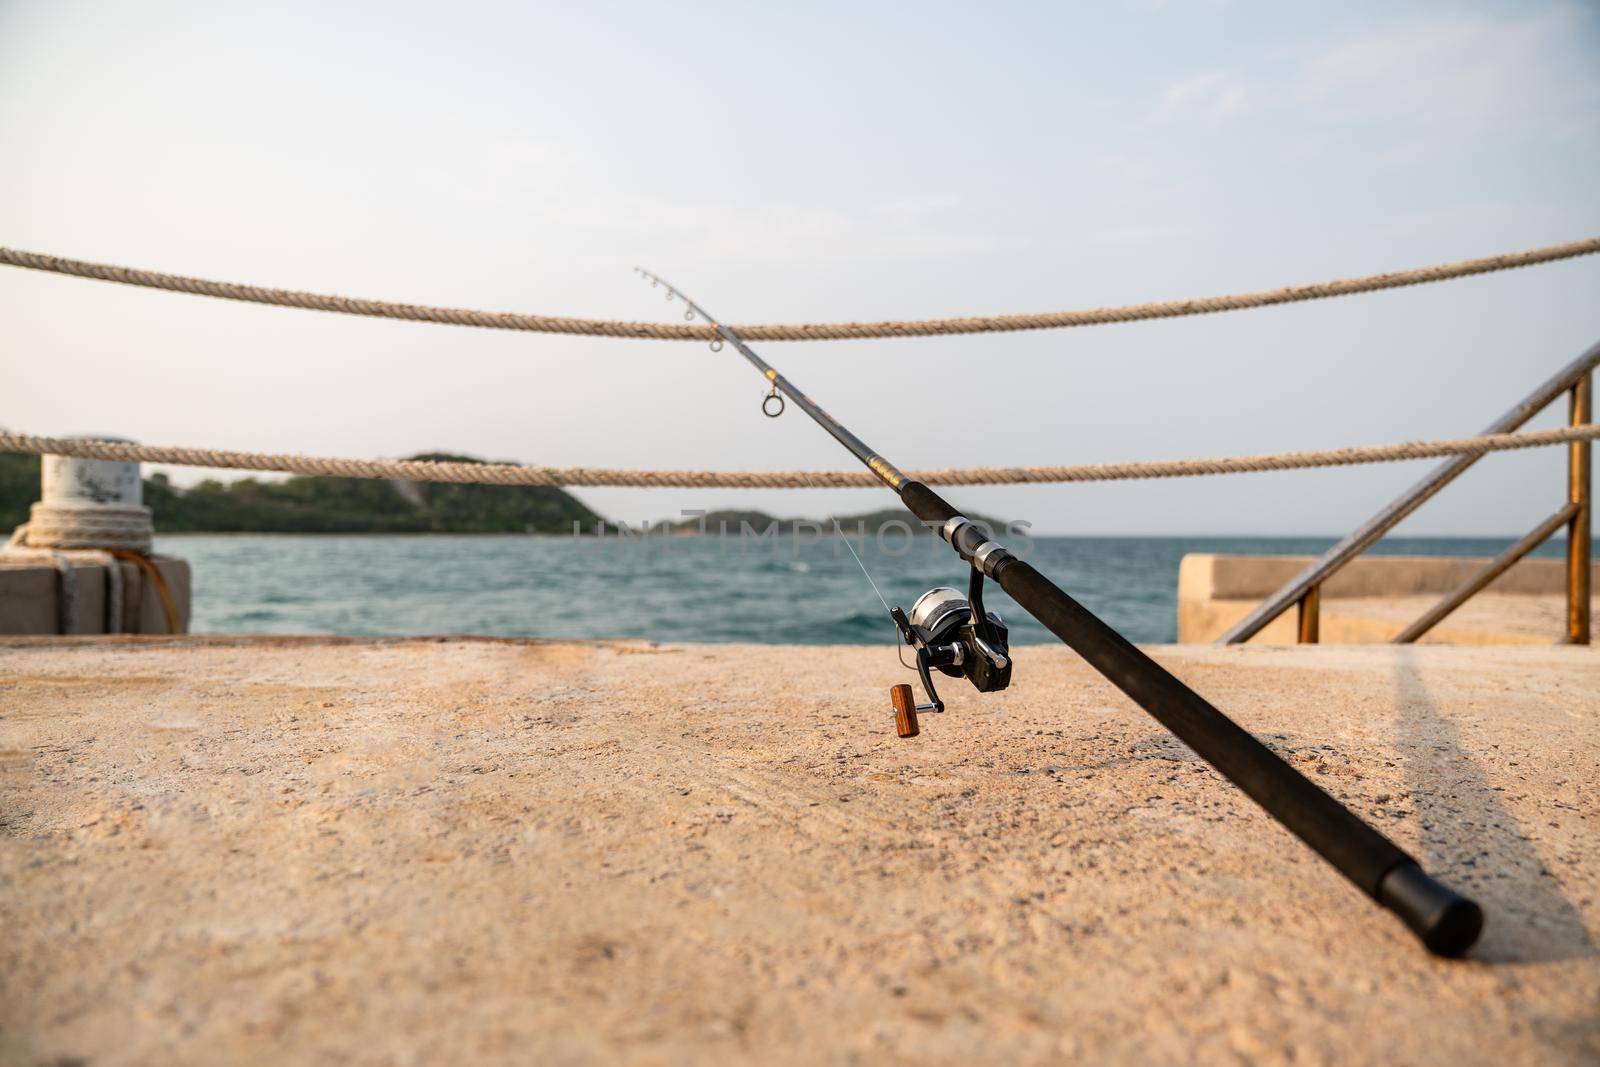 A fishing rod with sea background, fishing.